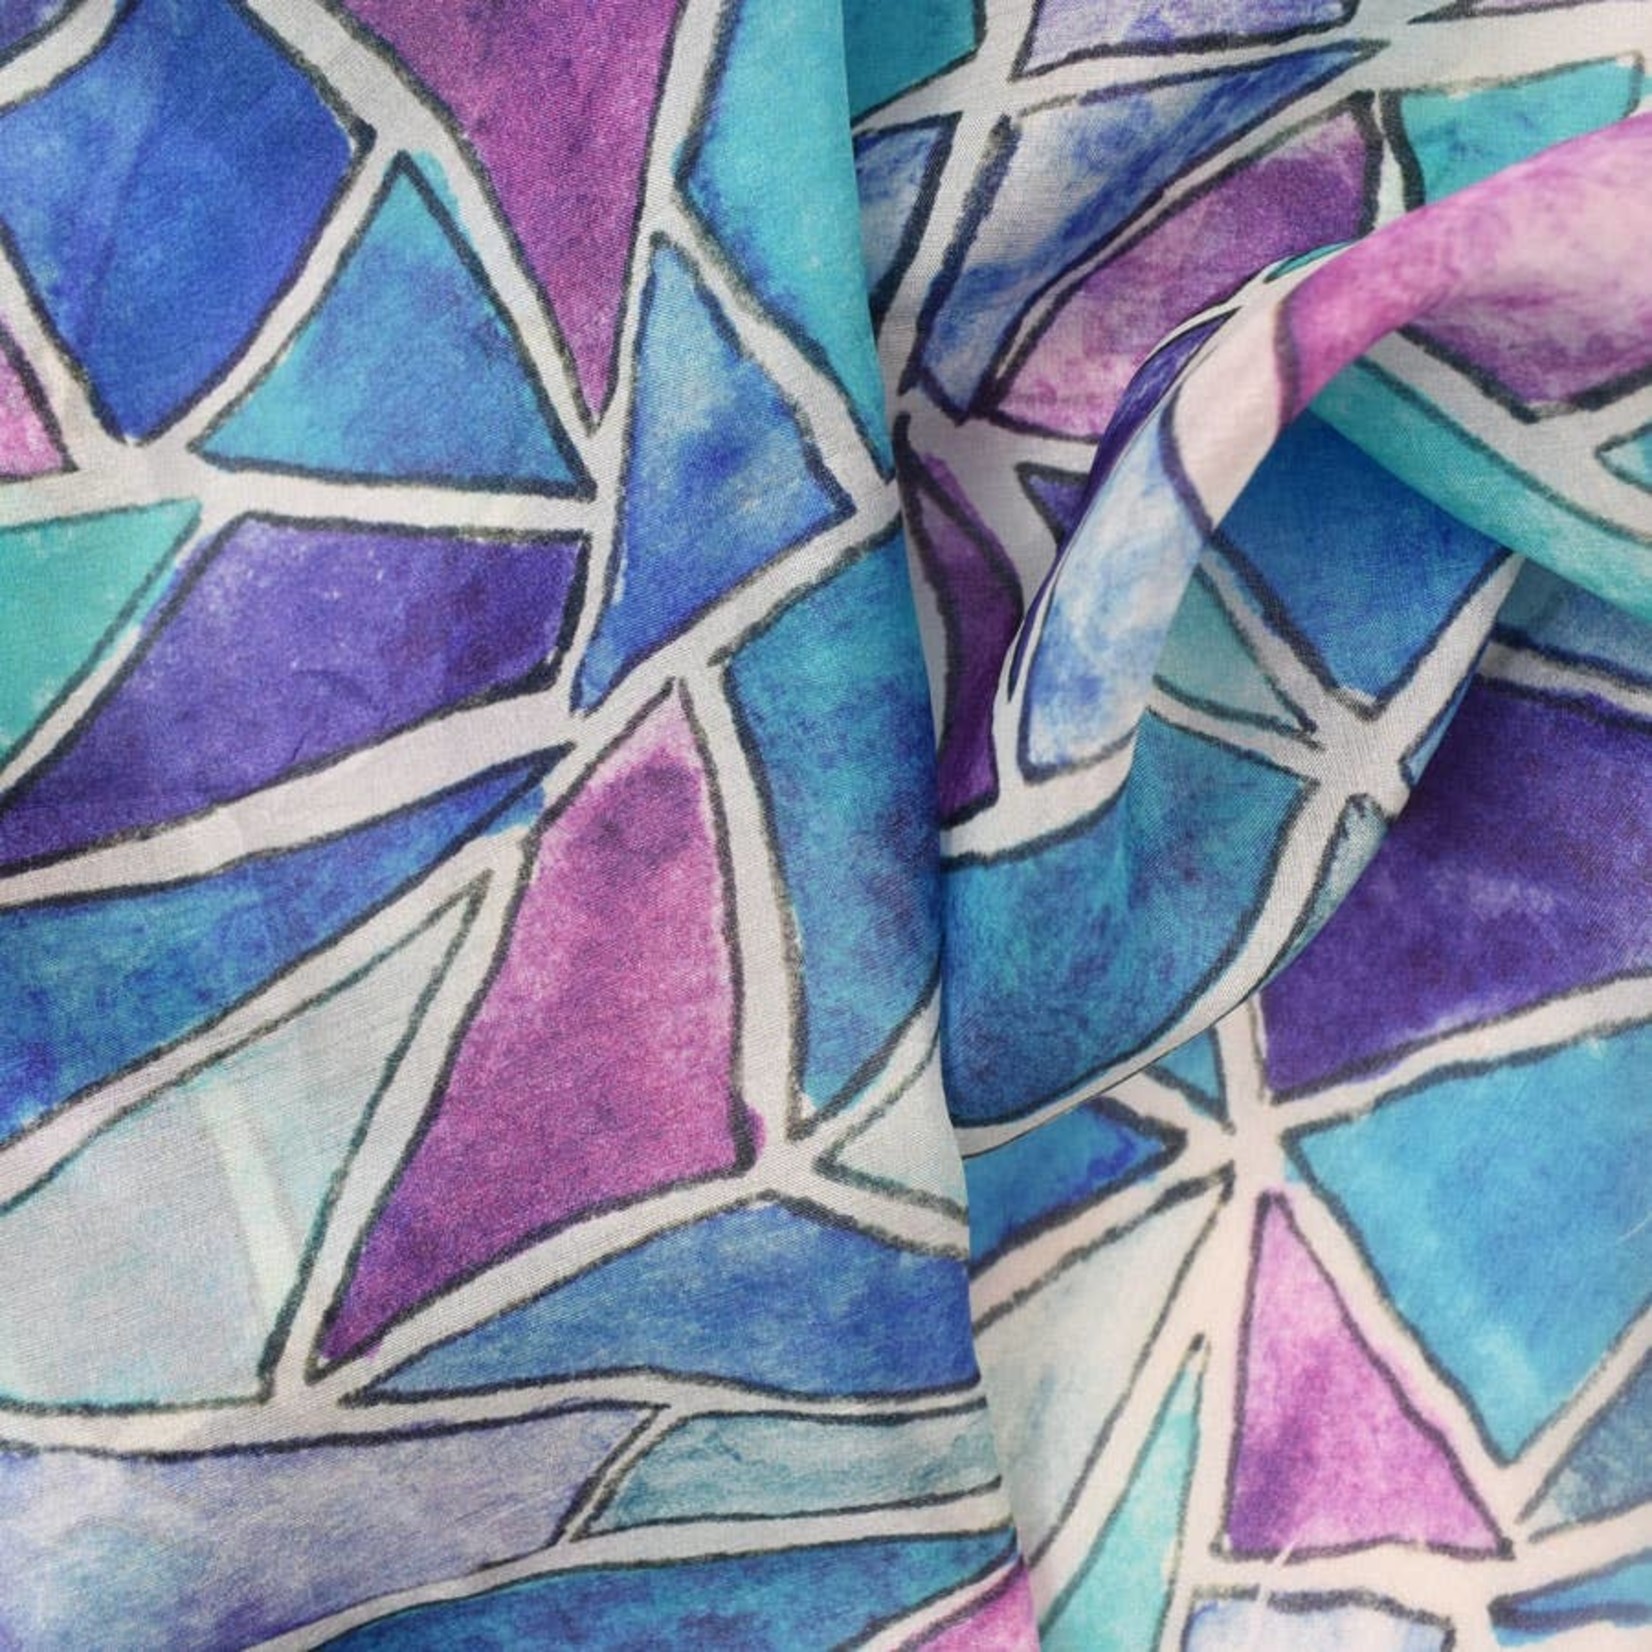 Celebration Stained Glass Silk Scarf in Blue